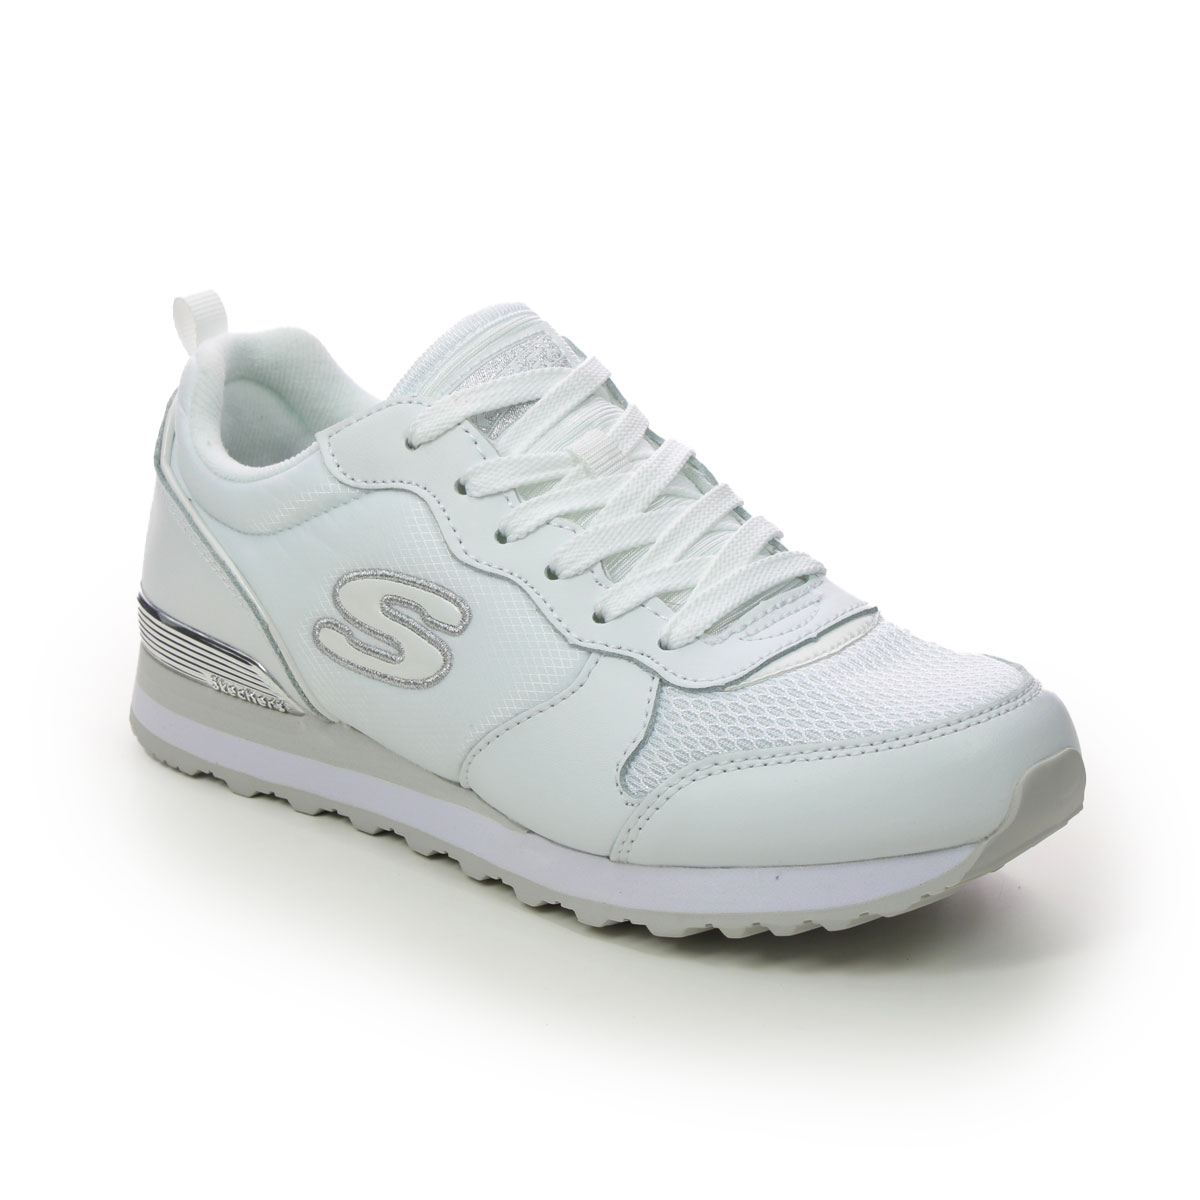 Skechers Og 85 Gold Gurl WSL White Silver Womens trainers 111 in a Plain Leather and Textile in Size 6